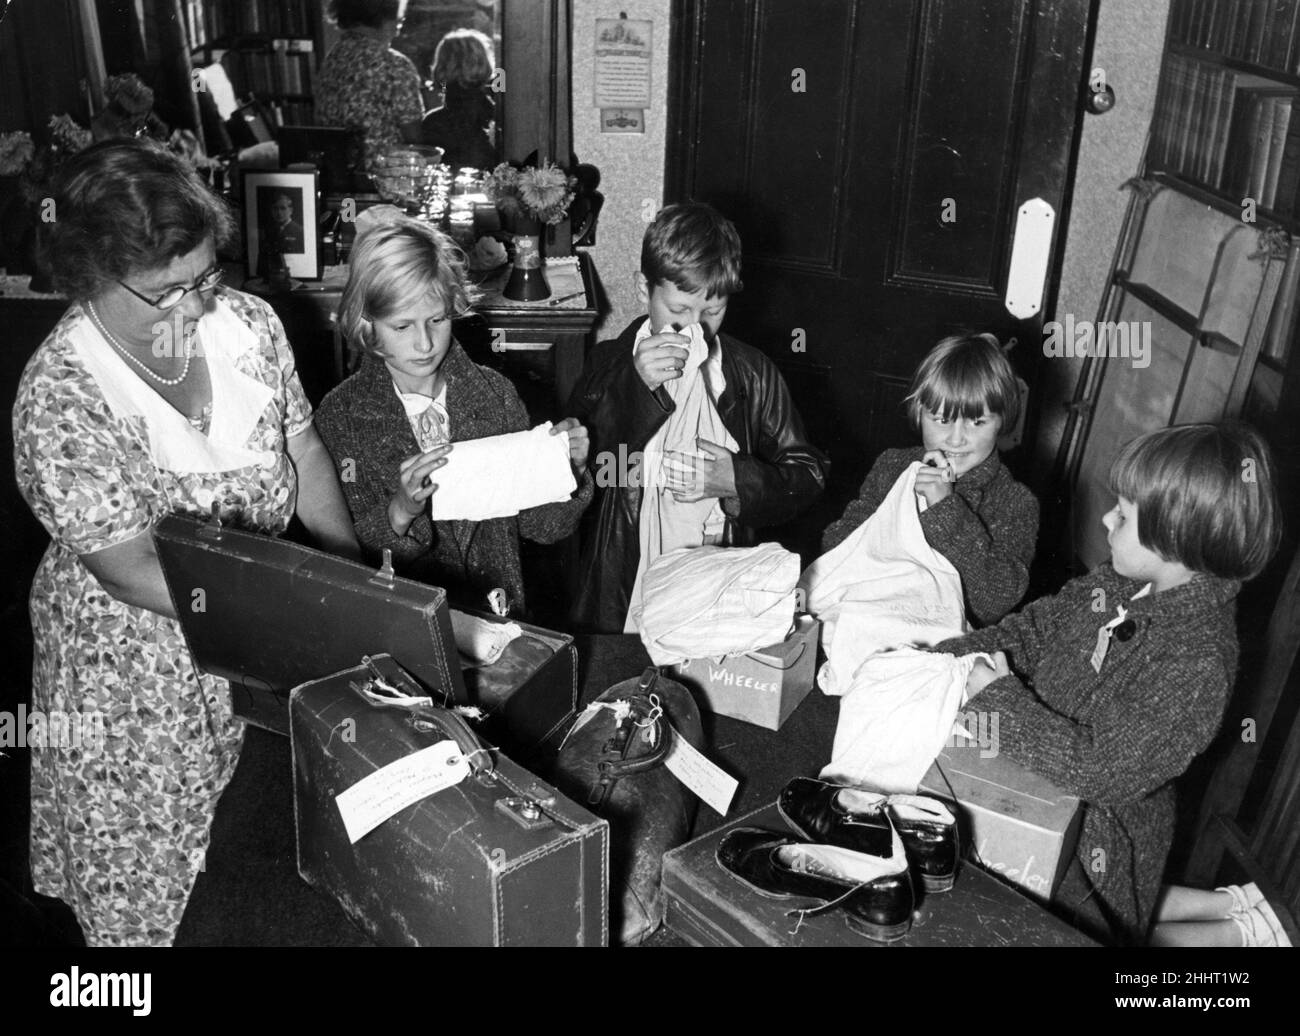 Children of Pimlico, London who attend St Michael's Church School on Buckingham Palace Road, packing for tomorrow's evacuation. The children, Patricia Wheeler, Maureen Wheeler, Teddy Wheeler and Peggy Wheelr are pictured with Mrs Rixson, the wife of the headmaster. 1st September 1939. Stock Photo